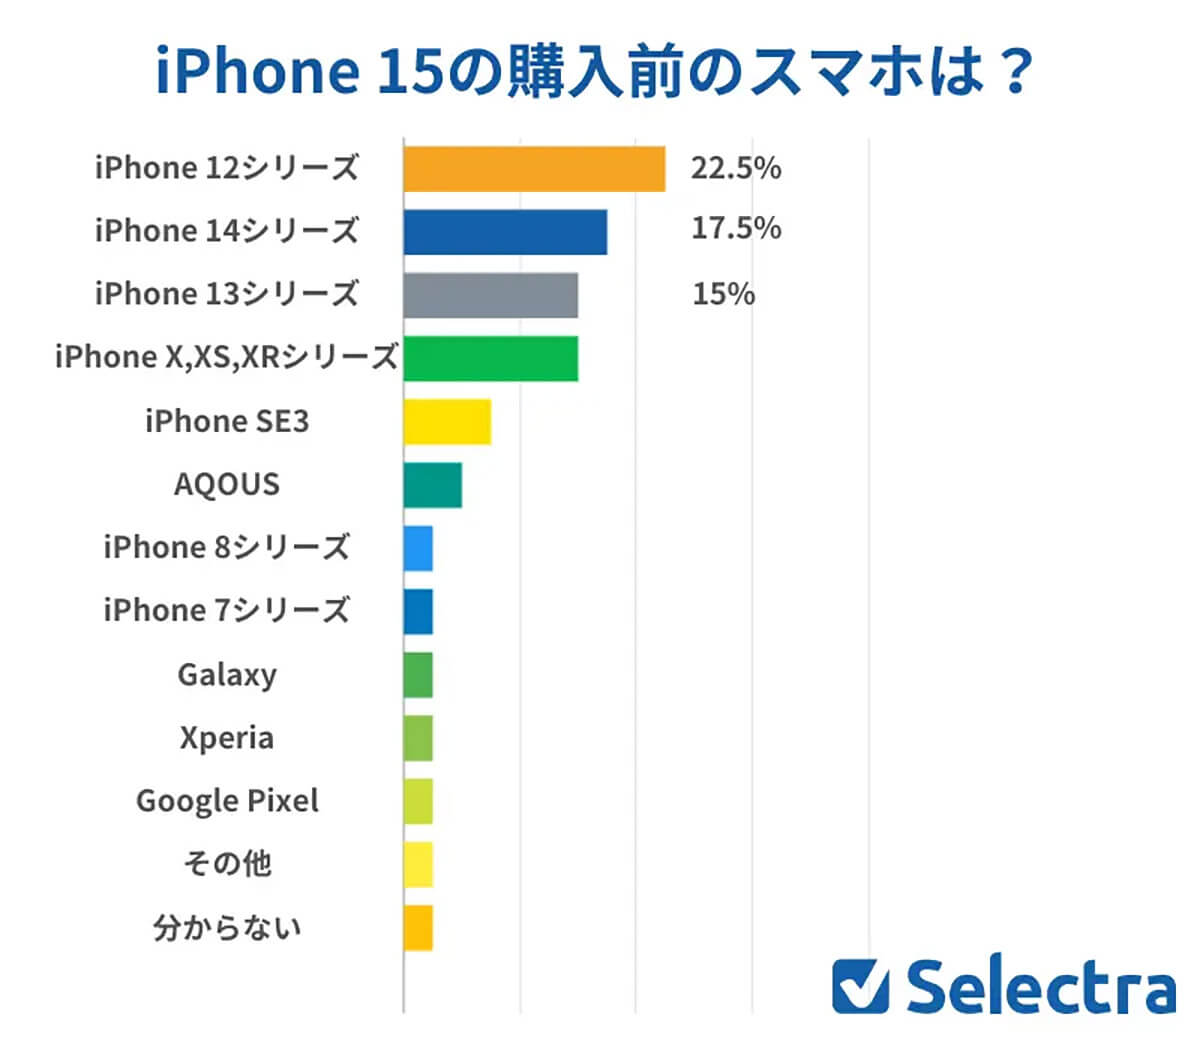 iPhone 15の購入前のスマホは？